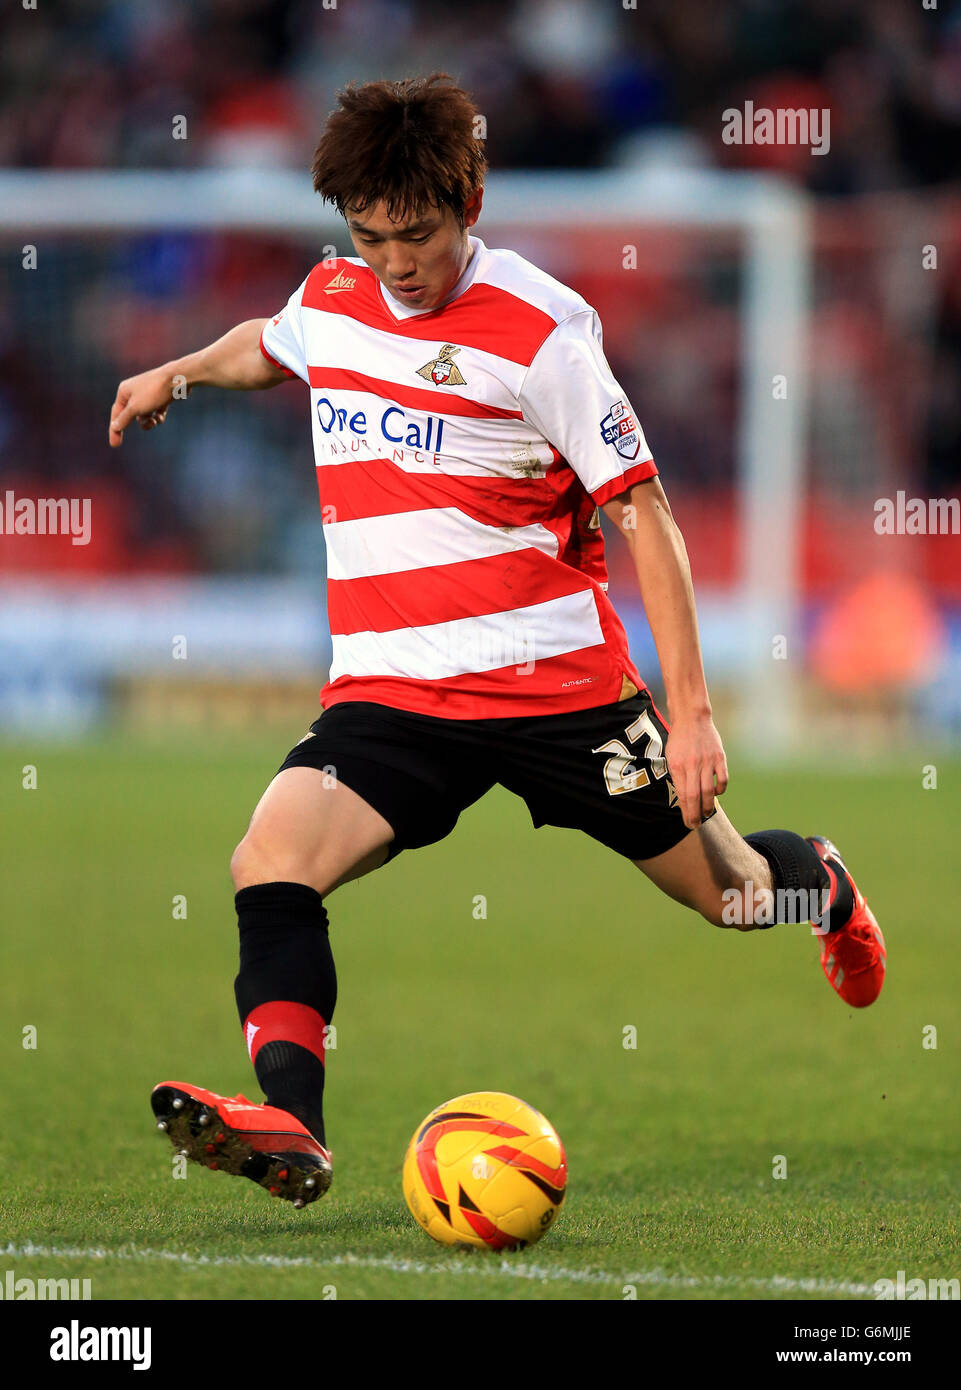 Soccer - Sky Bet Championship - Doncaster Rovers v Ipswich Town - Keepmoat Stadium. Suk-Young Yun, Doncaster Rovers Stock Photo